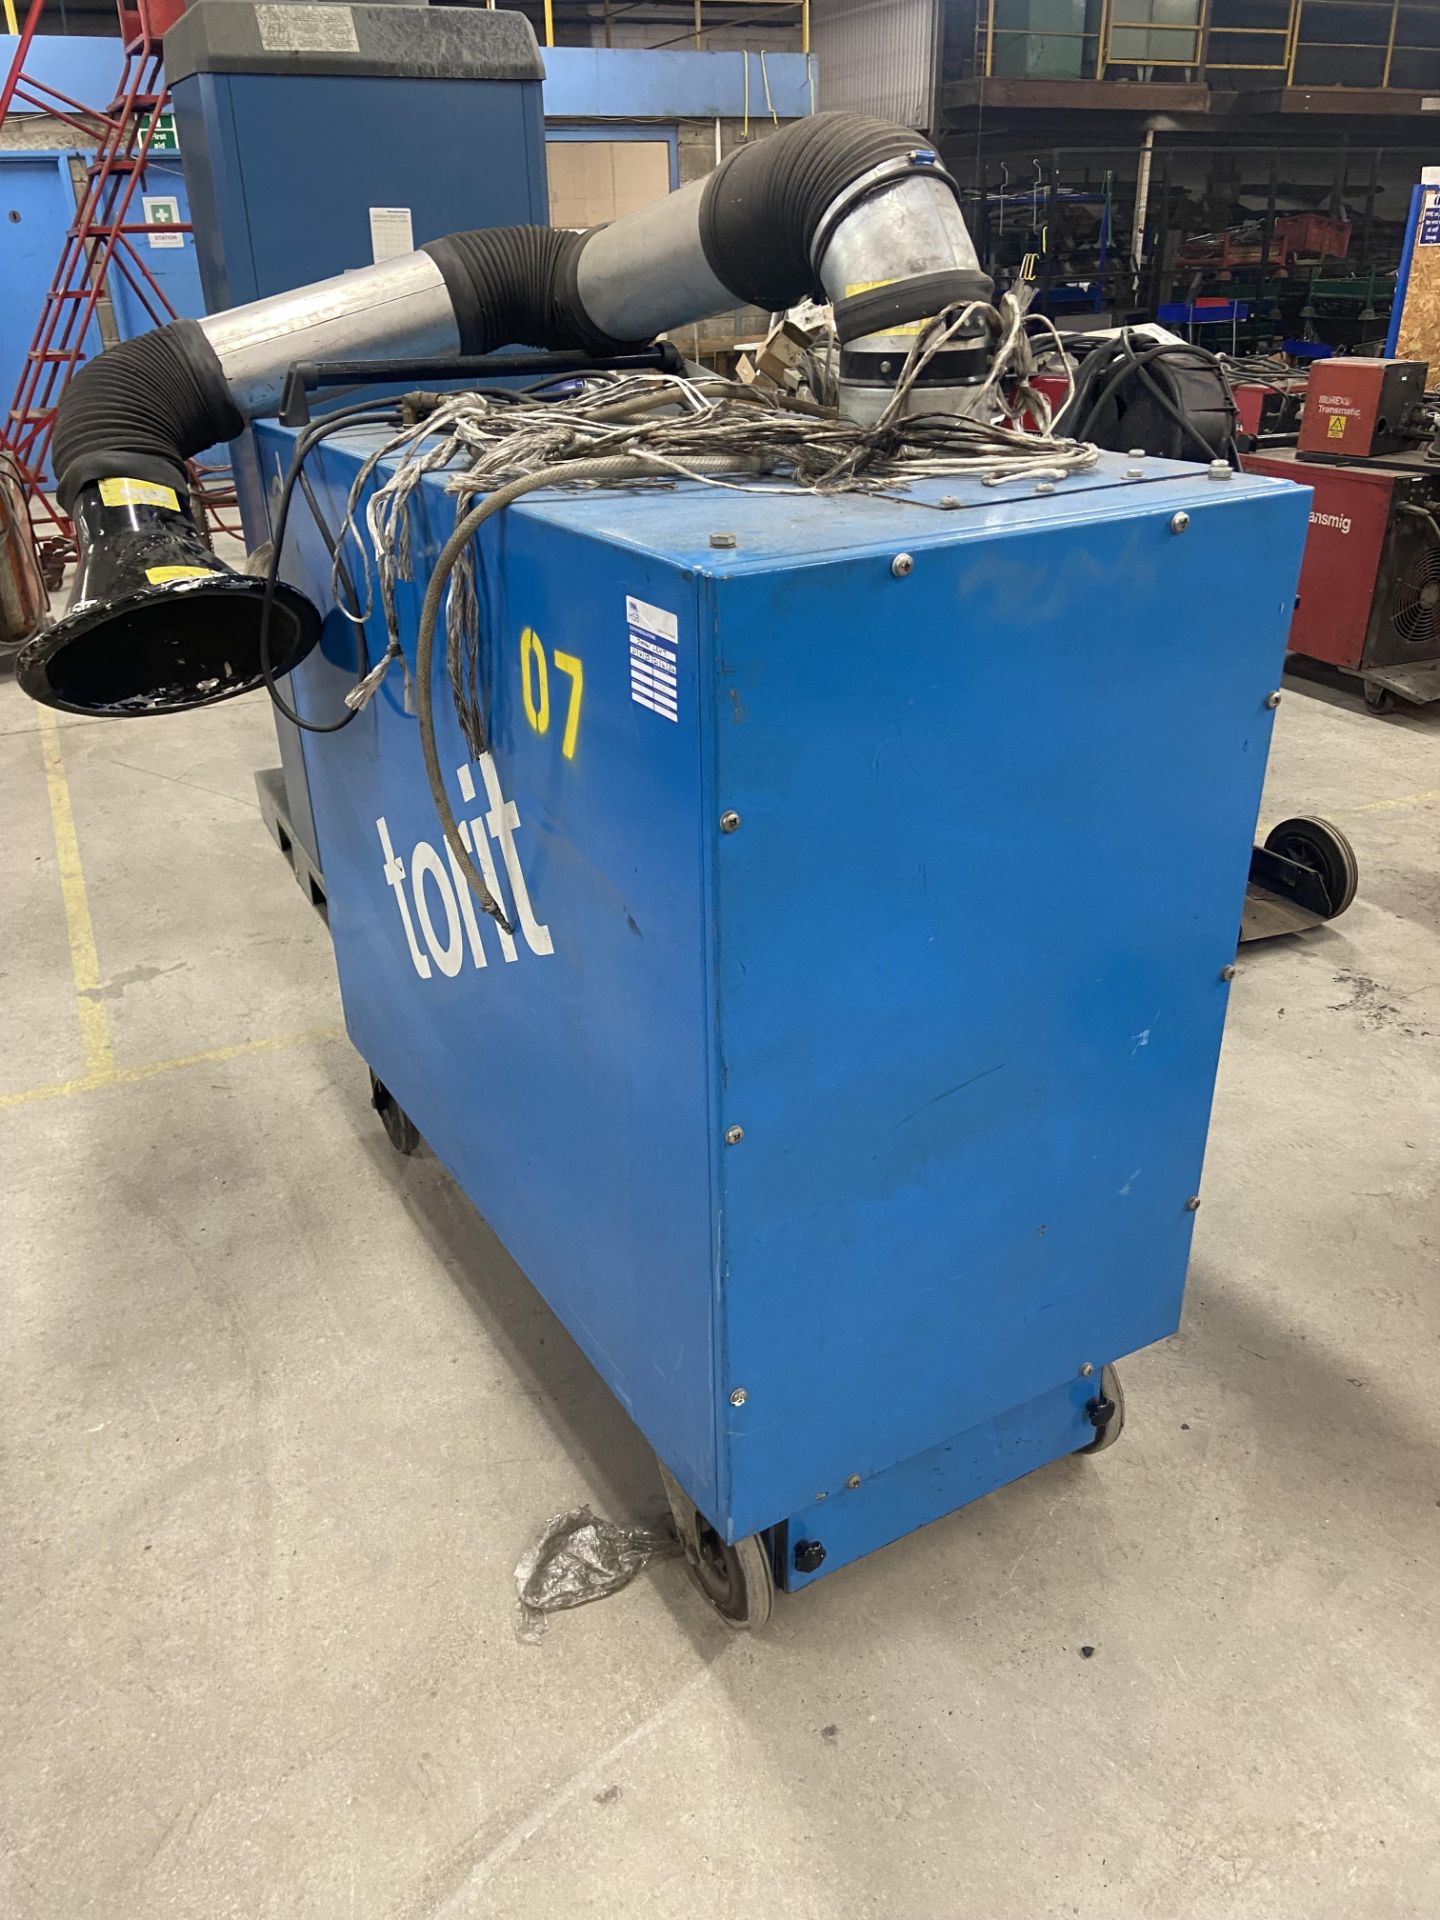 Donaldson Torit PT1001 FUME EXTRACTION UNIT, serial no. 264-6004-001 Please read the following - Image 3 of 4